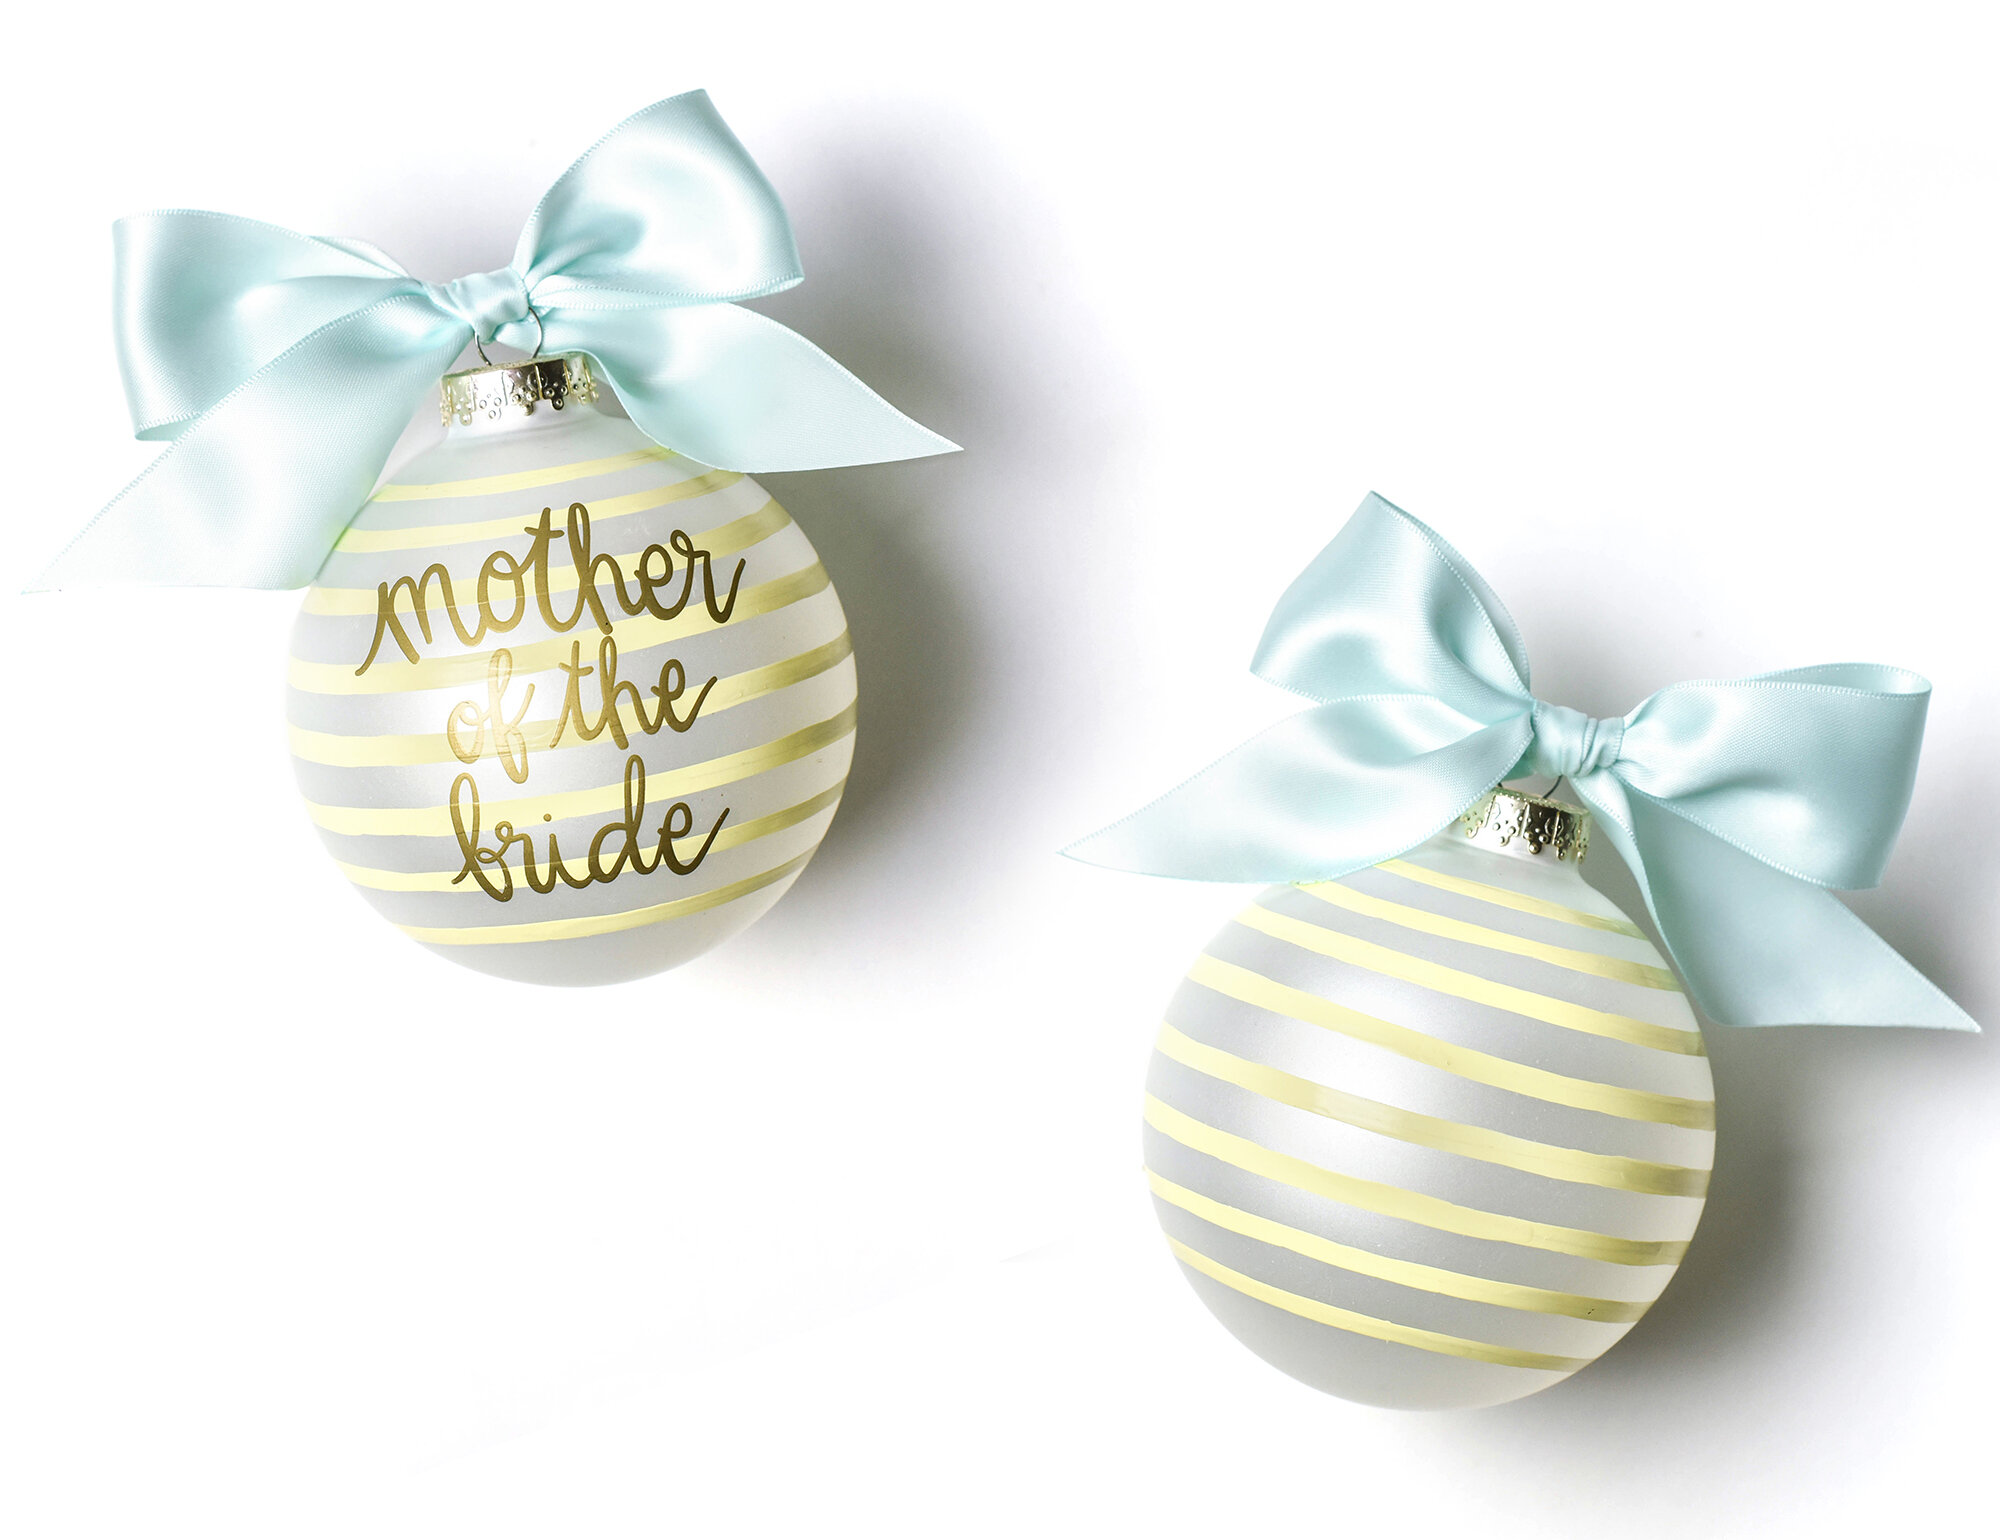 mother of the bride christmas ornament